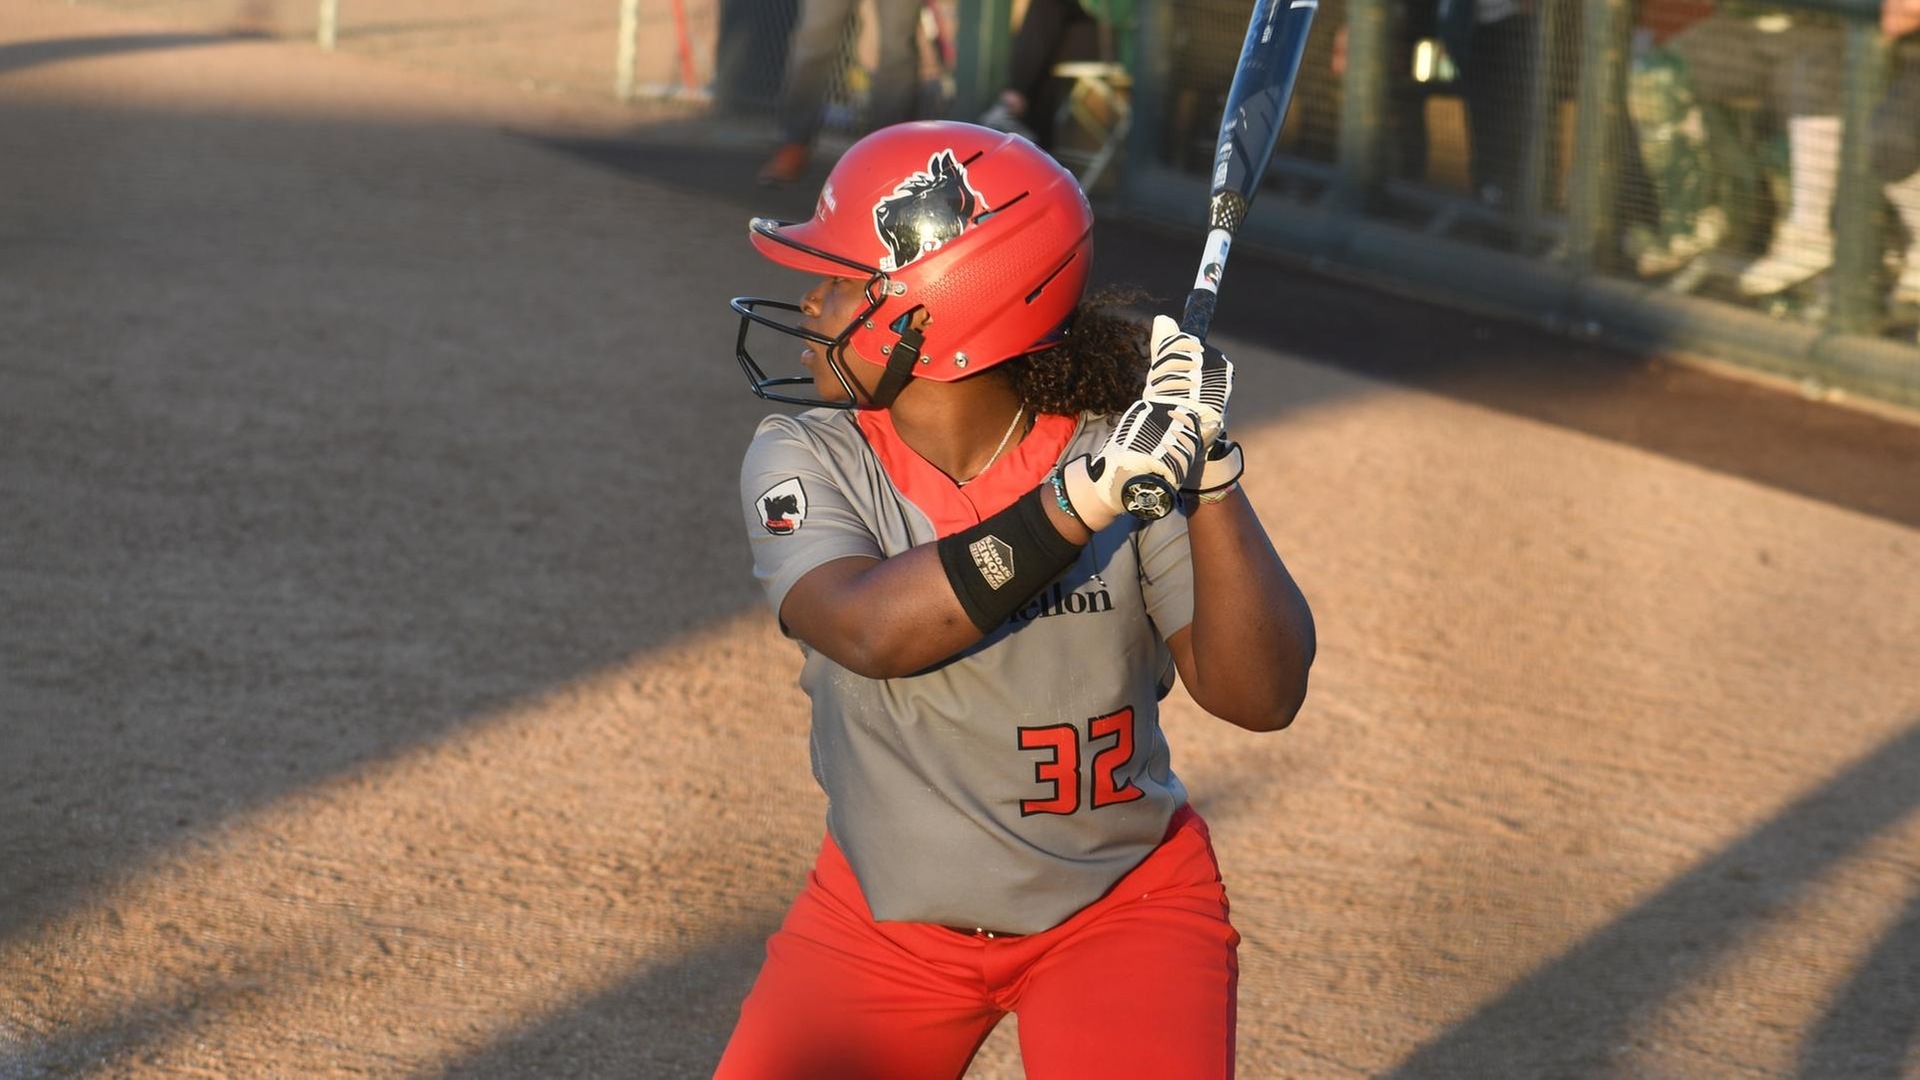 softball player wearing gray shirt and red pants standing at the plate